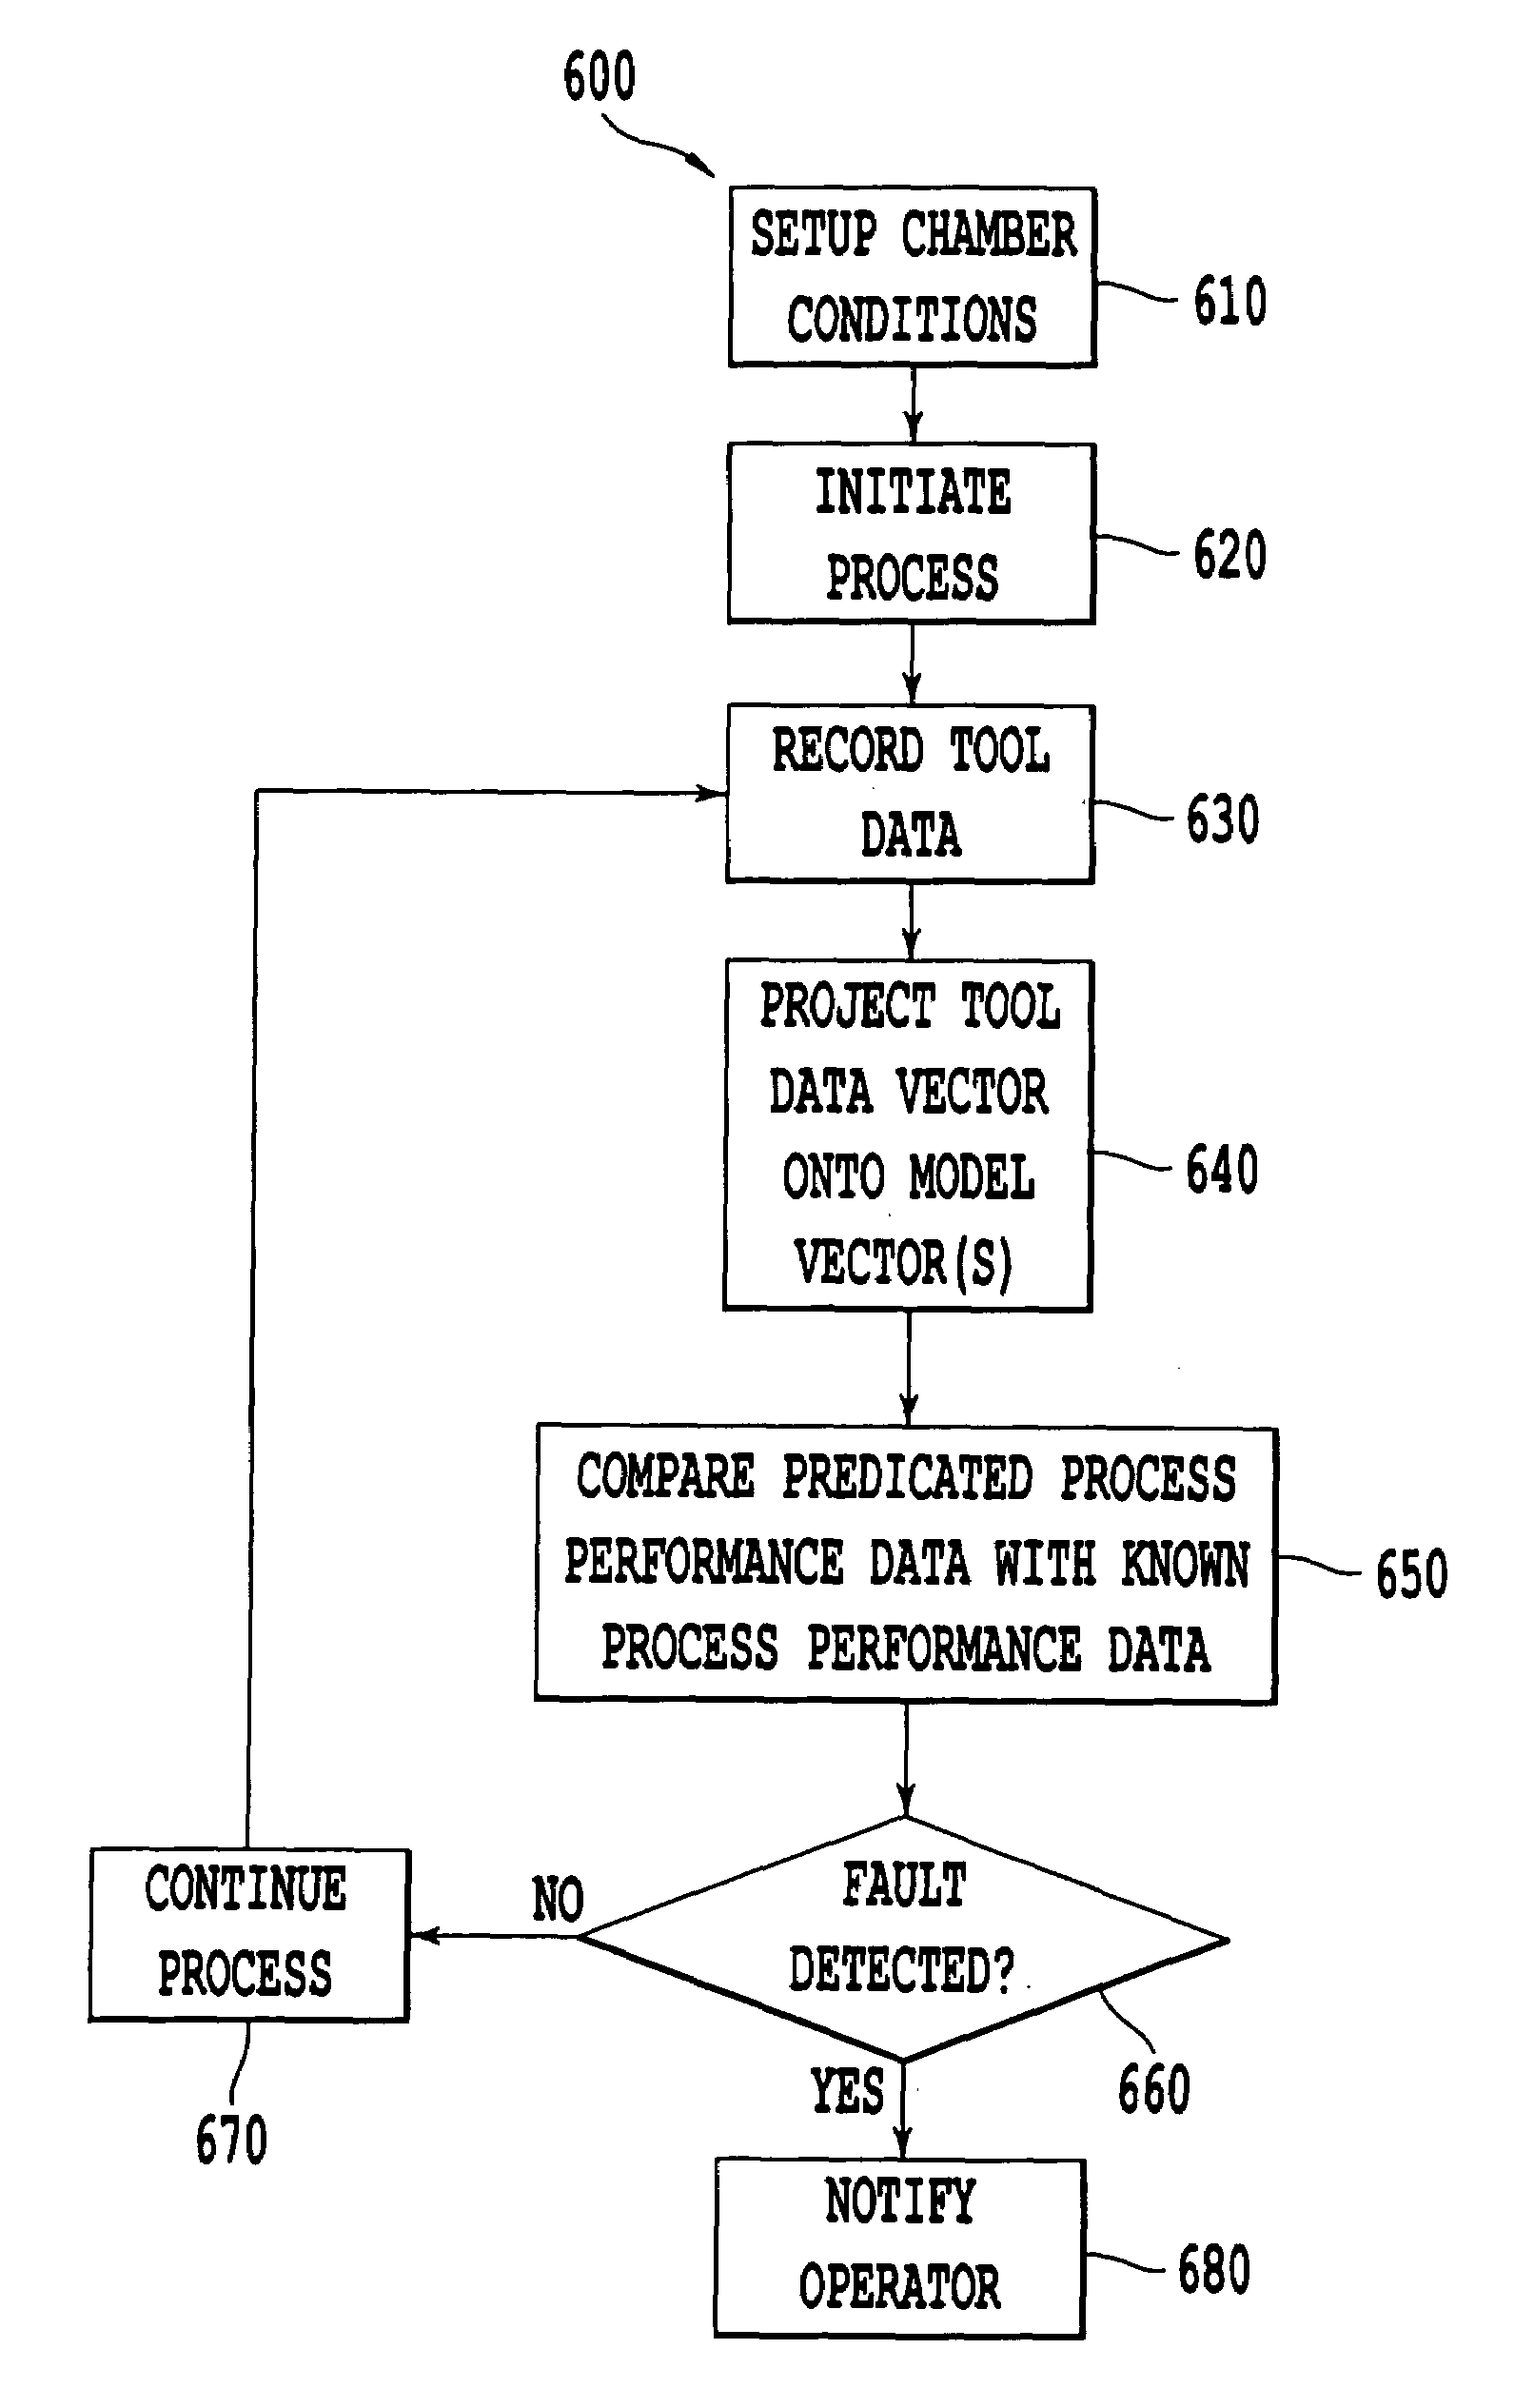 Controlling a material processing tool and performance data